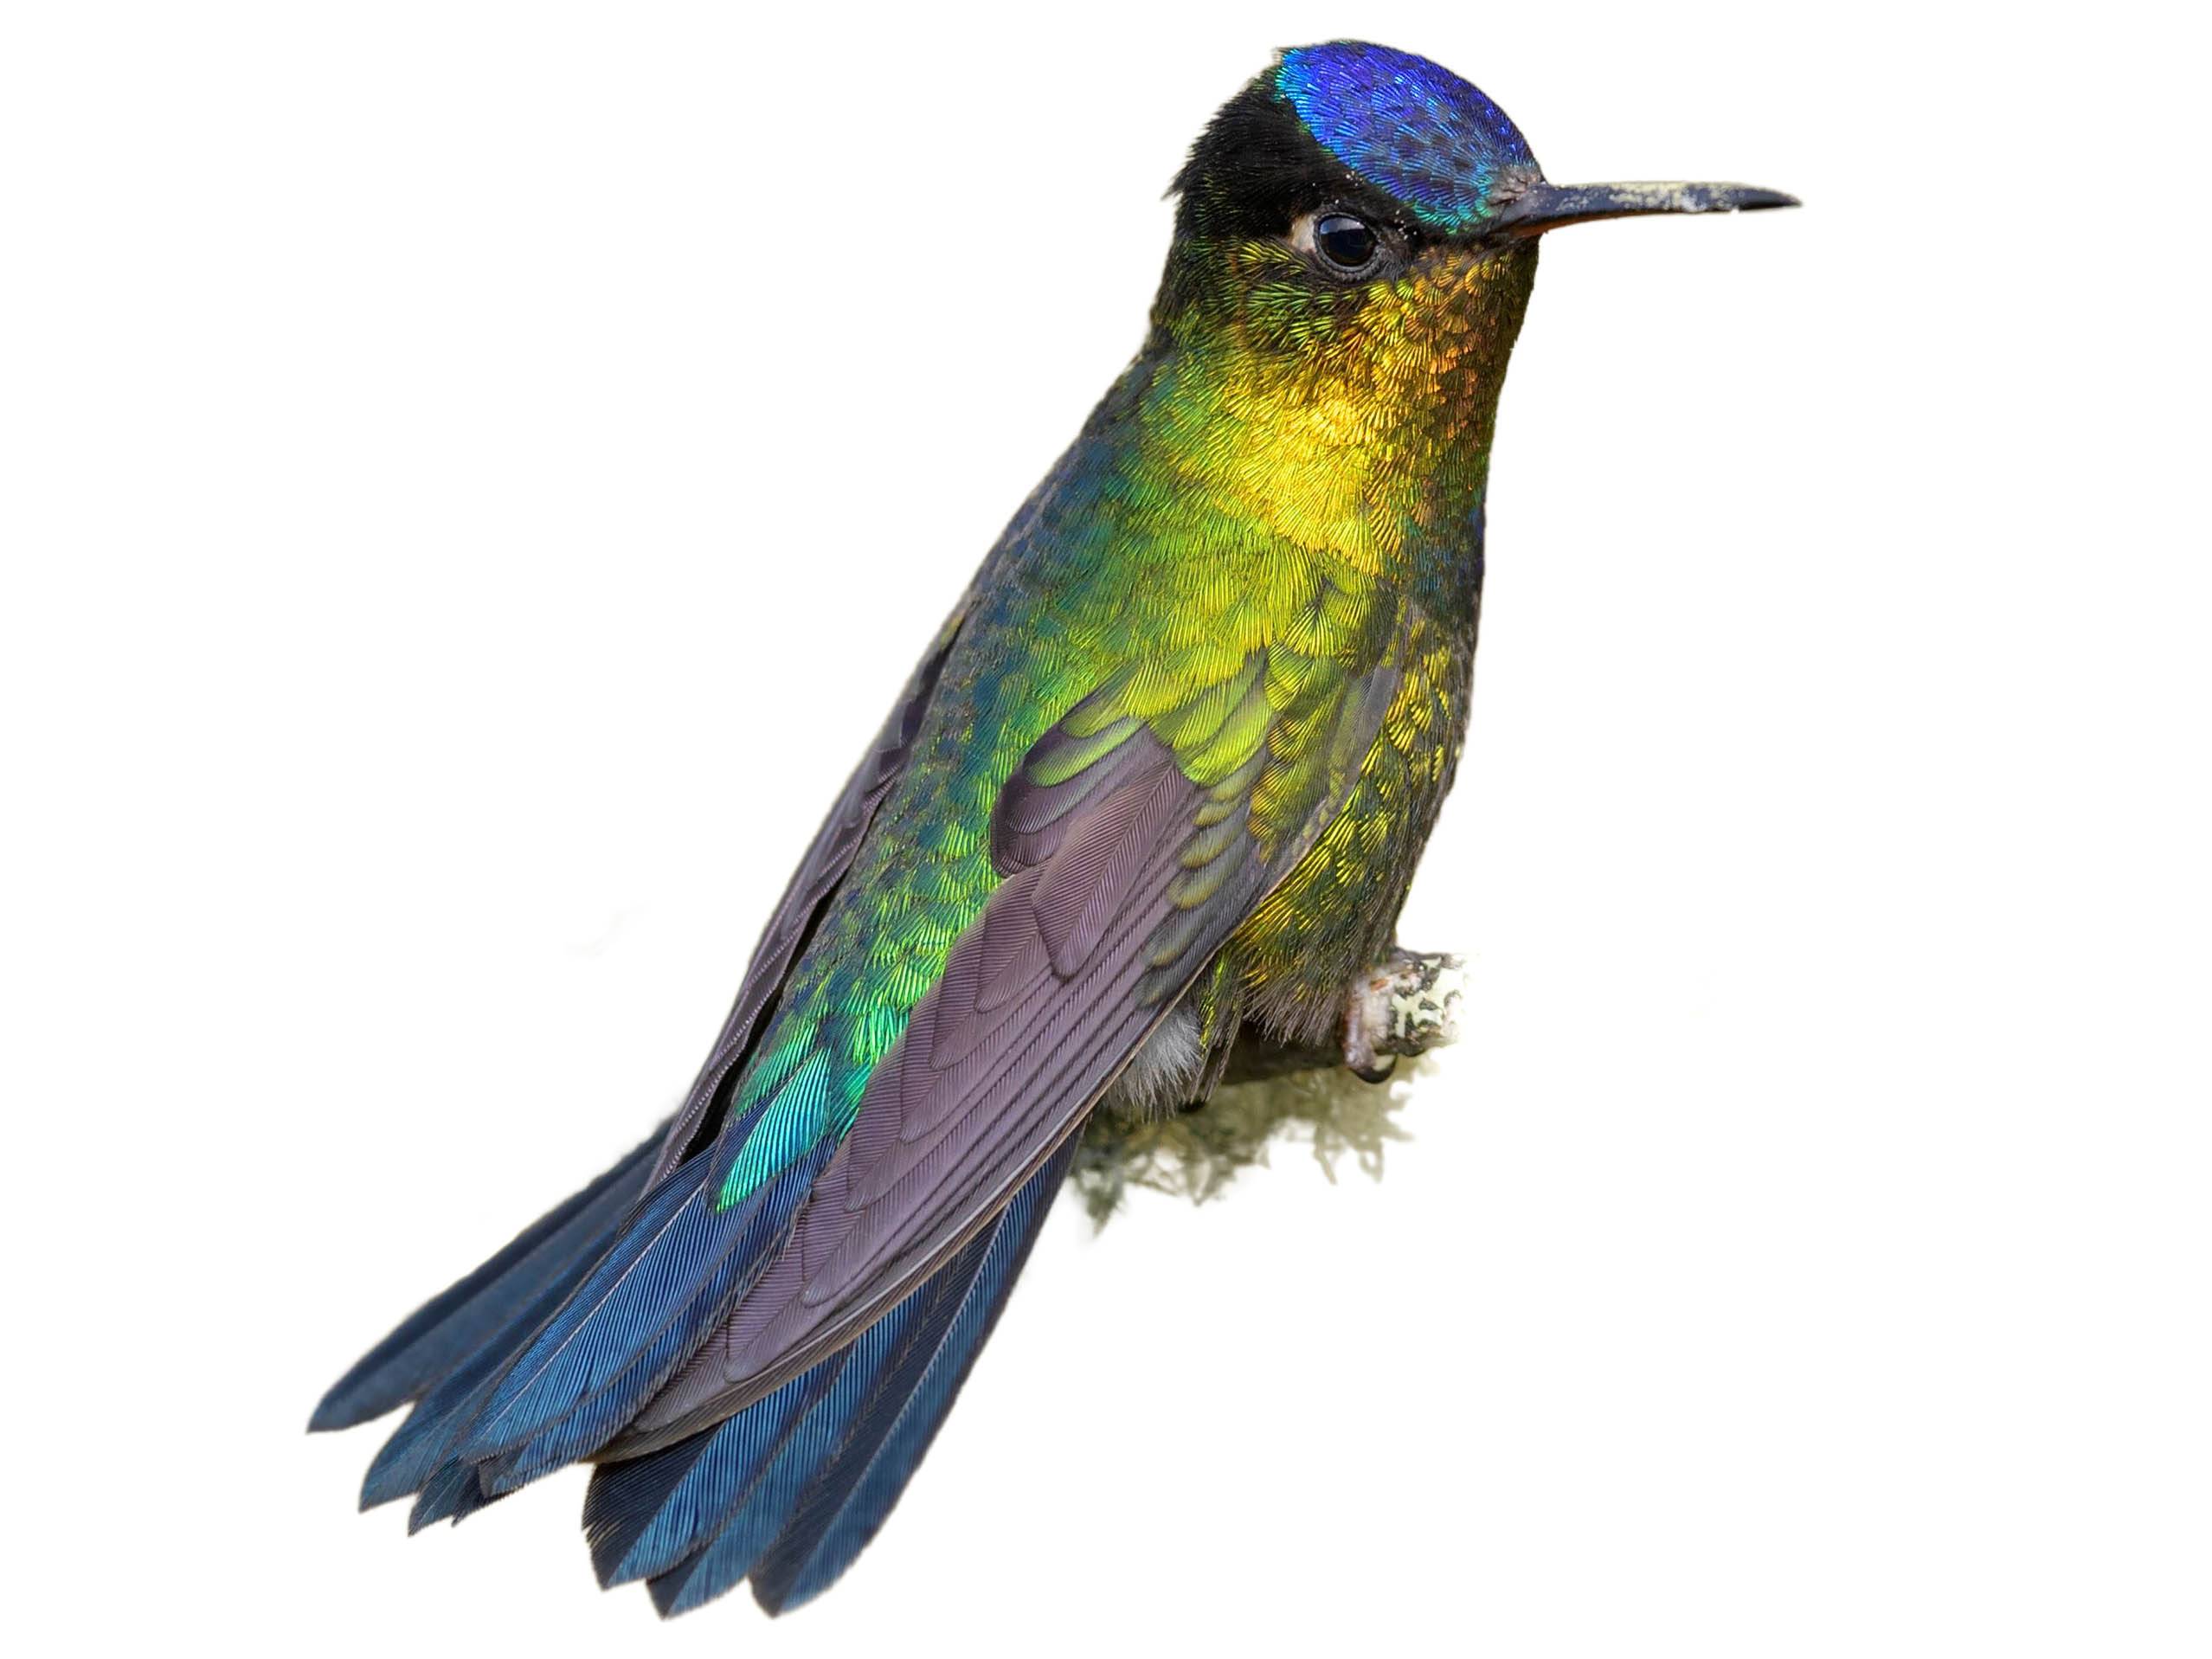 A photo of a Fiery-throated Hummingbird (Panterpe insignis)